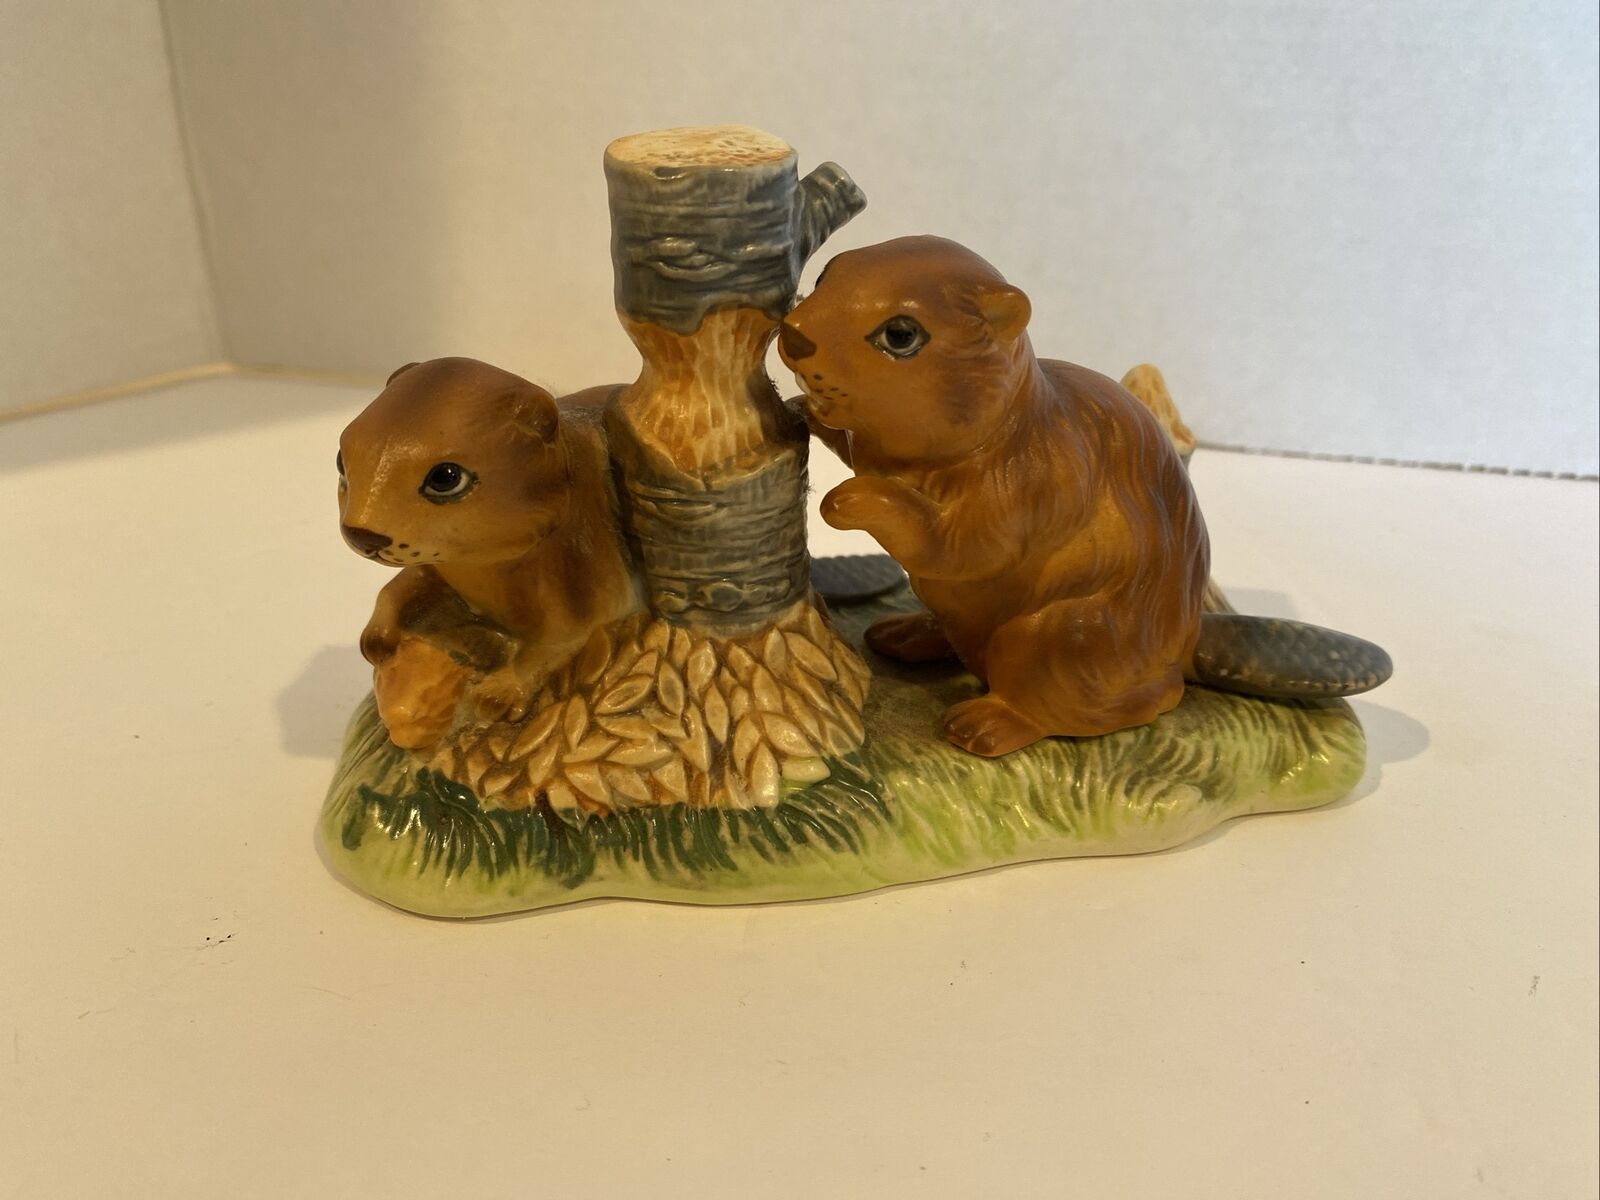 Vintage Herter\'s Ceramic Figurine 2 Beavers Cutting Down Trees Gnawing On Trees